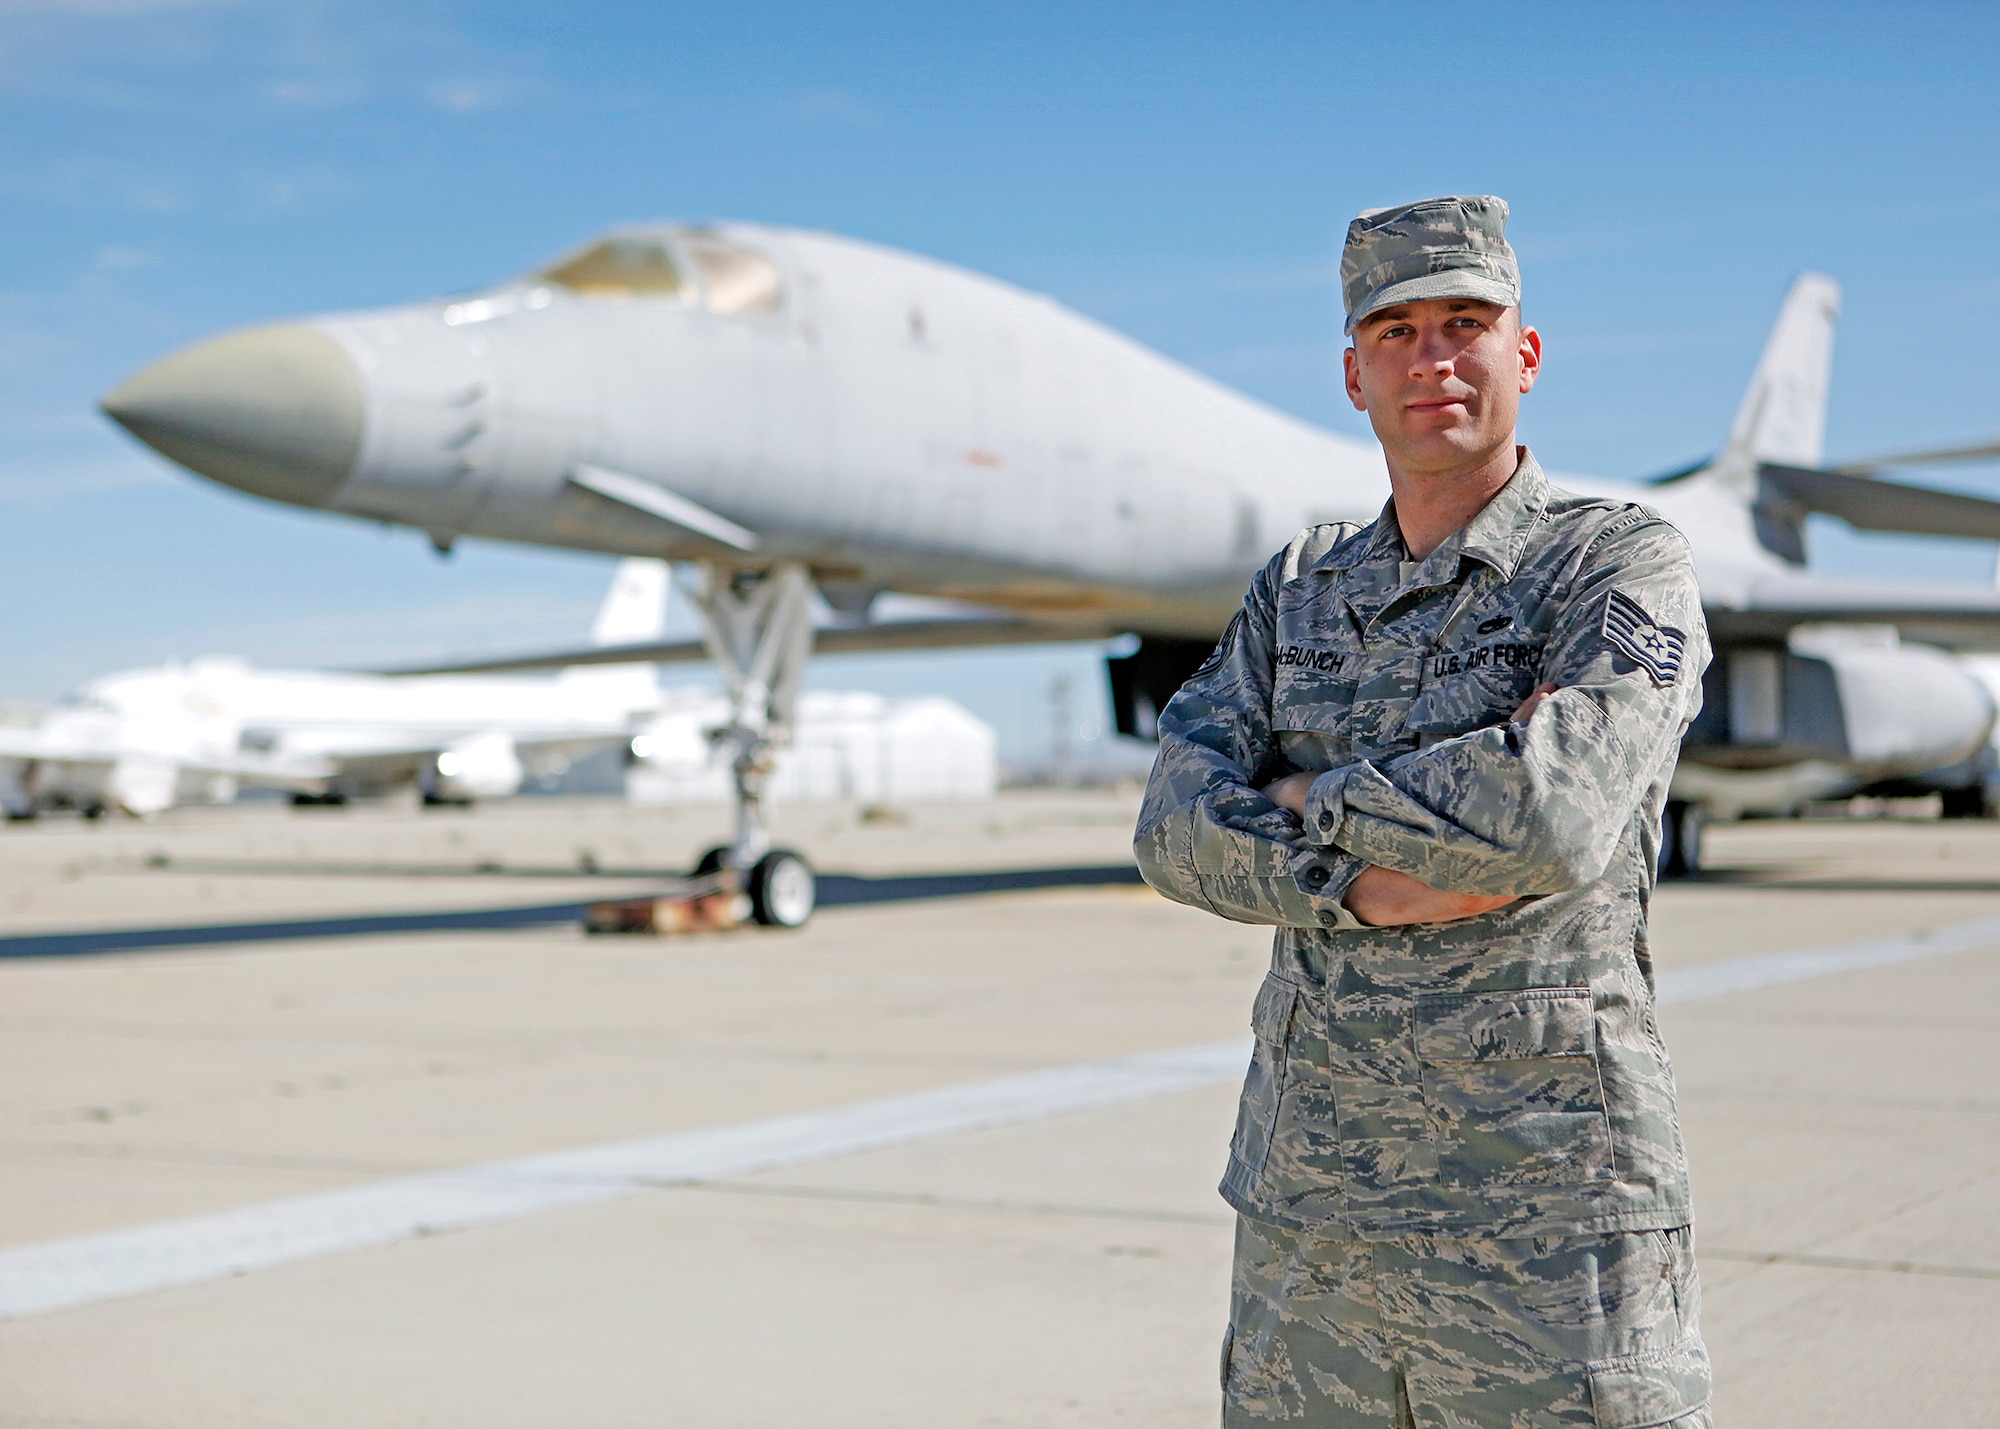 Tech. Sgt. Chad McBunch, 31st Test and Evaluation Squadron B-1 crew chief, stands in front of one of the first B-1s he worked on as a first-term Airman upon arriving at Edwards as a dedicated crew chief in 2002. (U.S. Air Force photo by Jet Fabara)